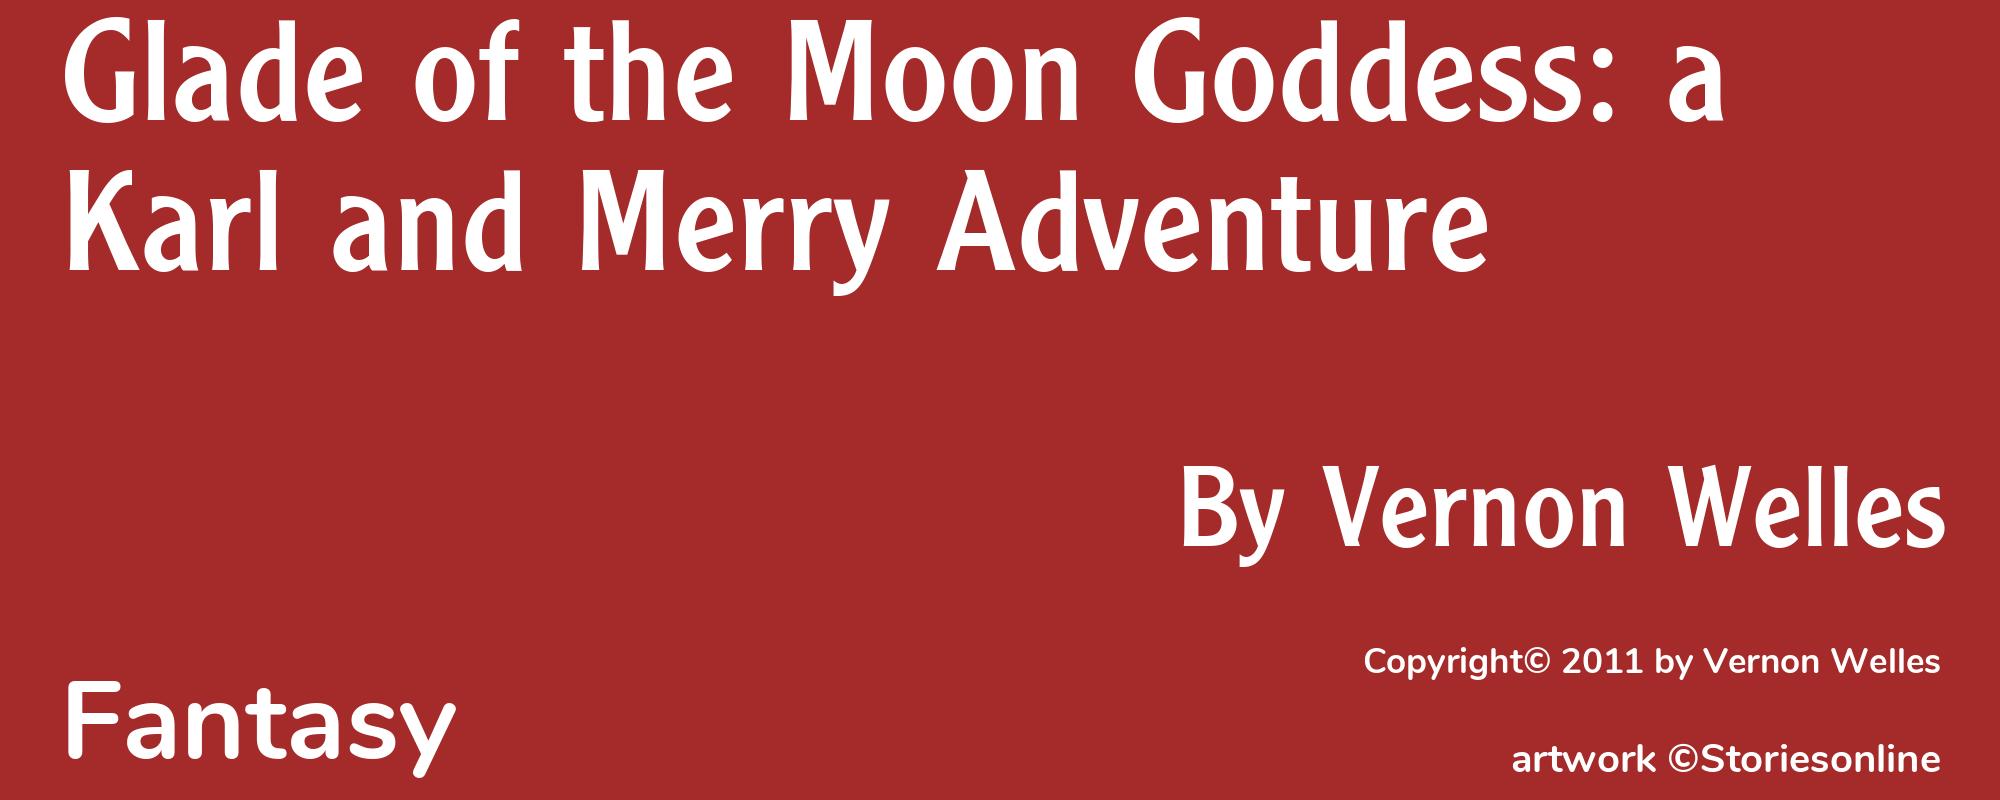 Glade of the Moon Goddess: a Karl and Merry Adventure - Cover